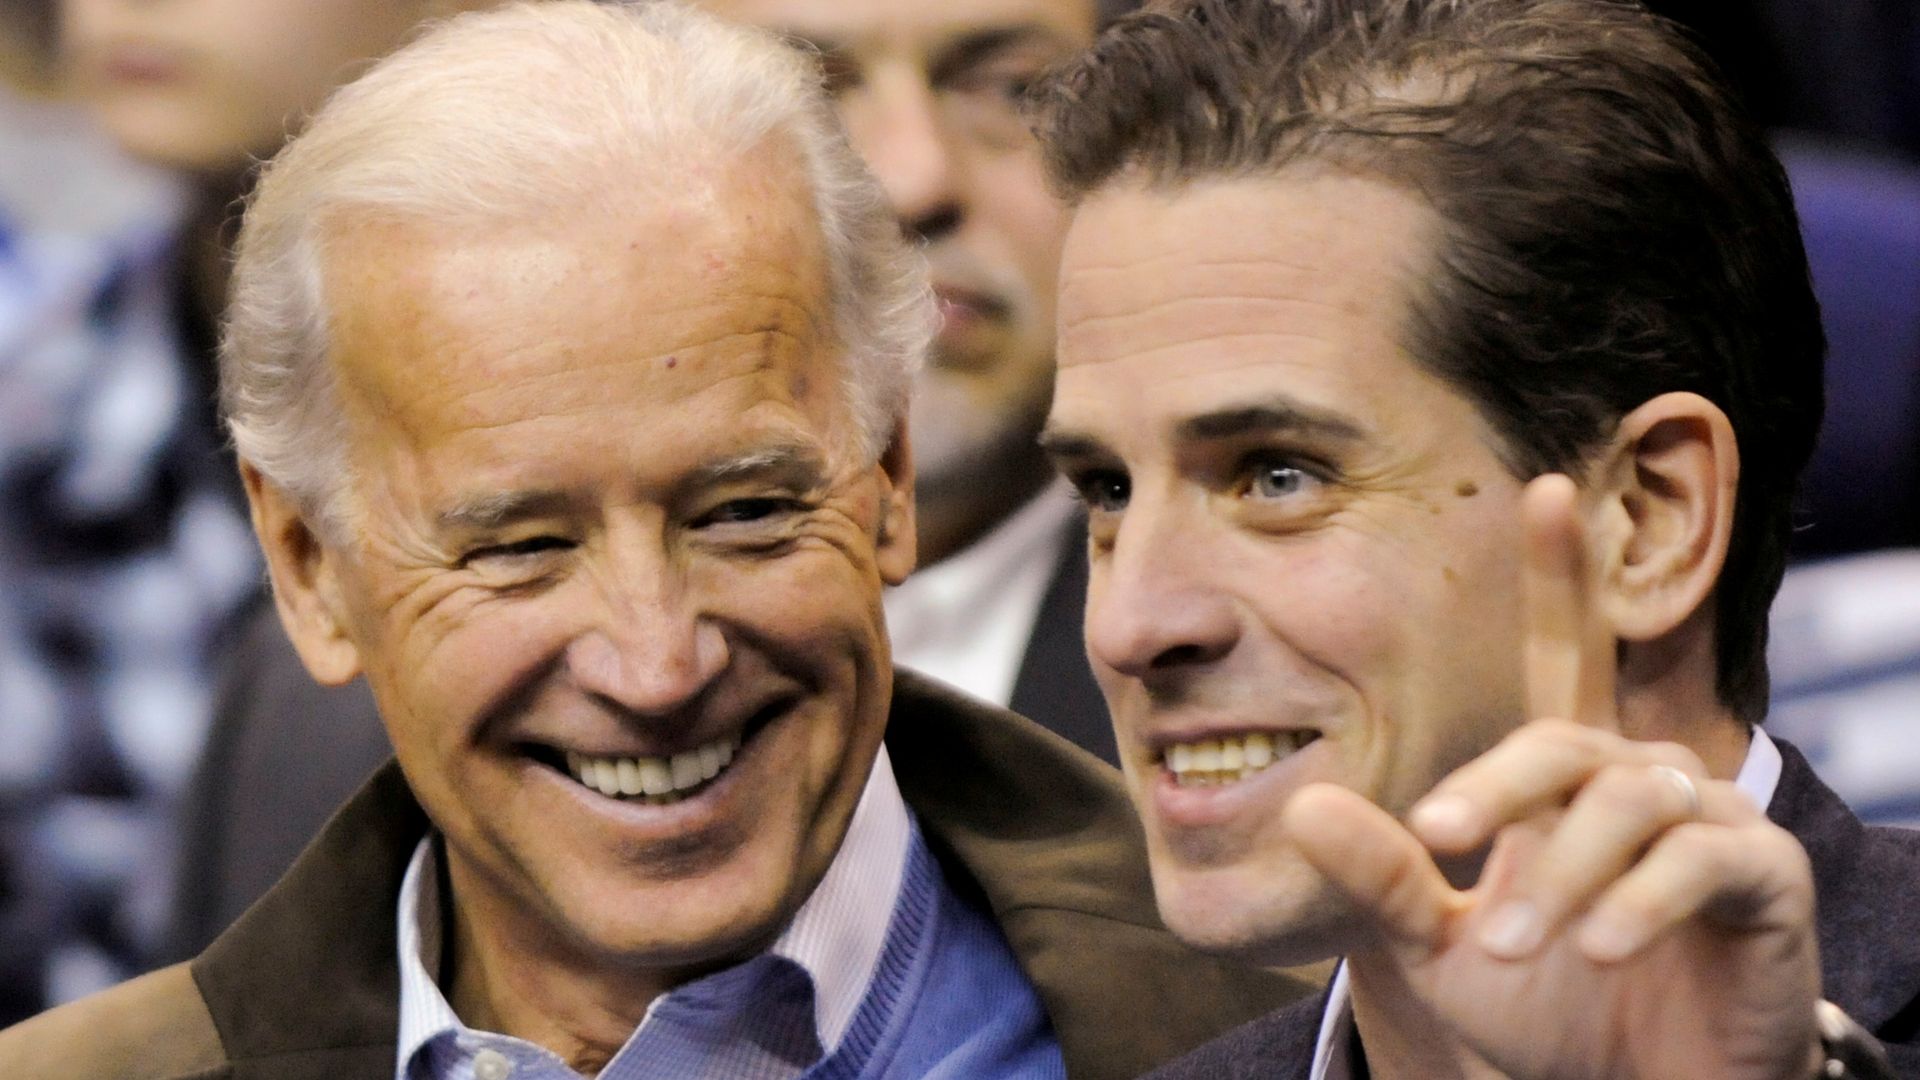 Did the FBI help cover up evidence of an alleged bribe the Biden family received from a Ukrainian oligarch when he was vice president?